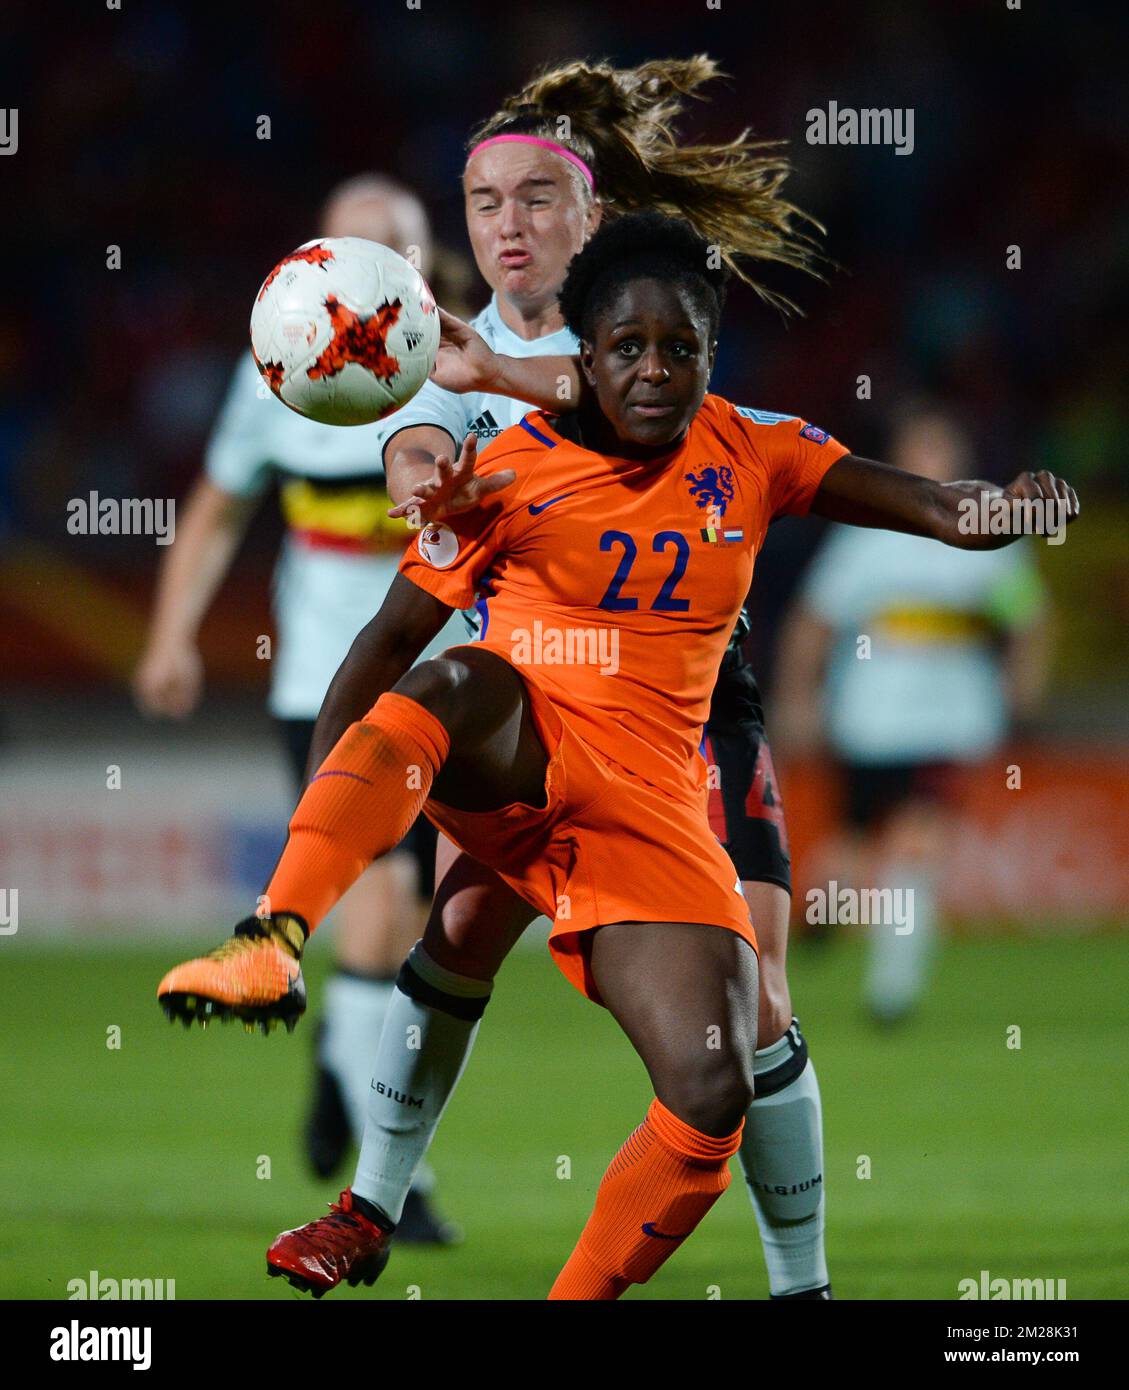 Dutch Liza van der Most and Belgium's Davinia Vanmechelen pictured in action during a soccer game between Belgian national women's soccer team Red Flames and The Netherlands, the third game in group A in the group stage of the Women's European Championship 2017 in the Netherlands, Monday 24 July 2017 in Tilburg, The Netherlands. BELGA PHOTO DAVID CATRY Stock Photo